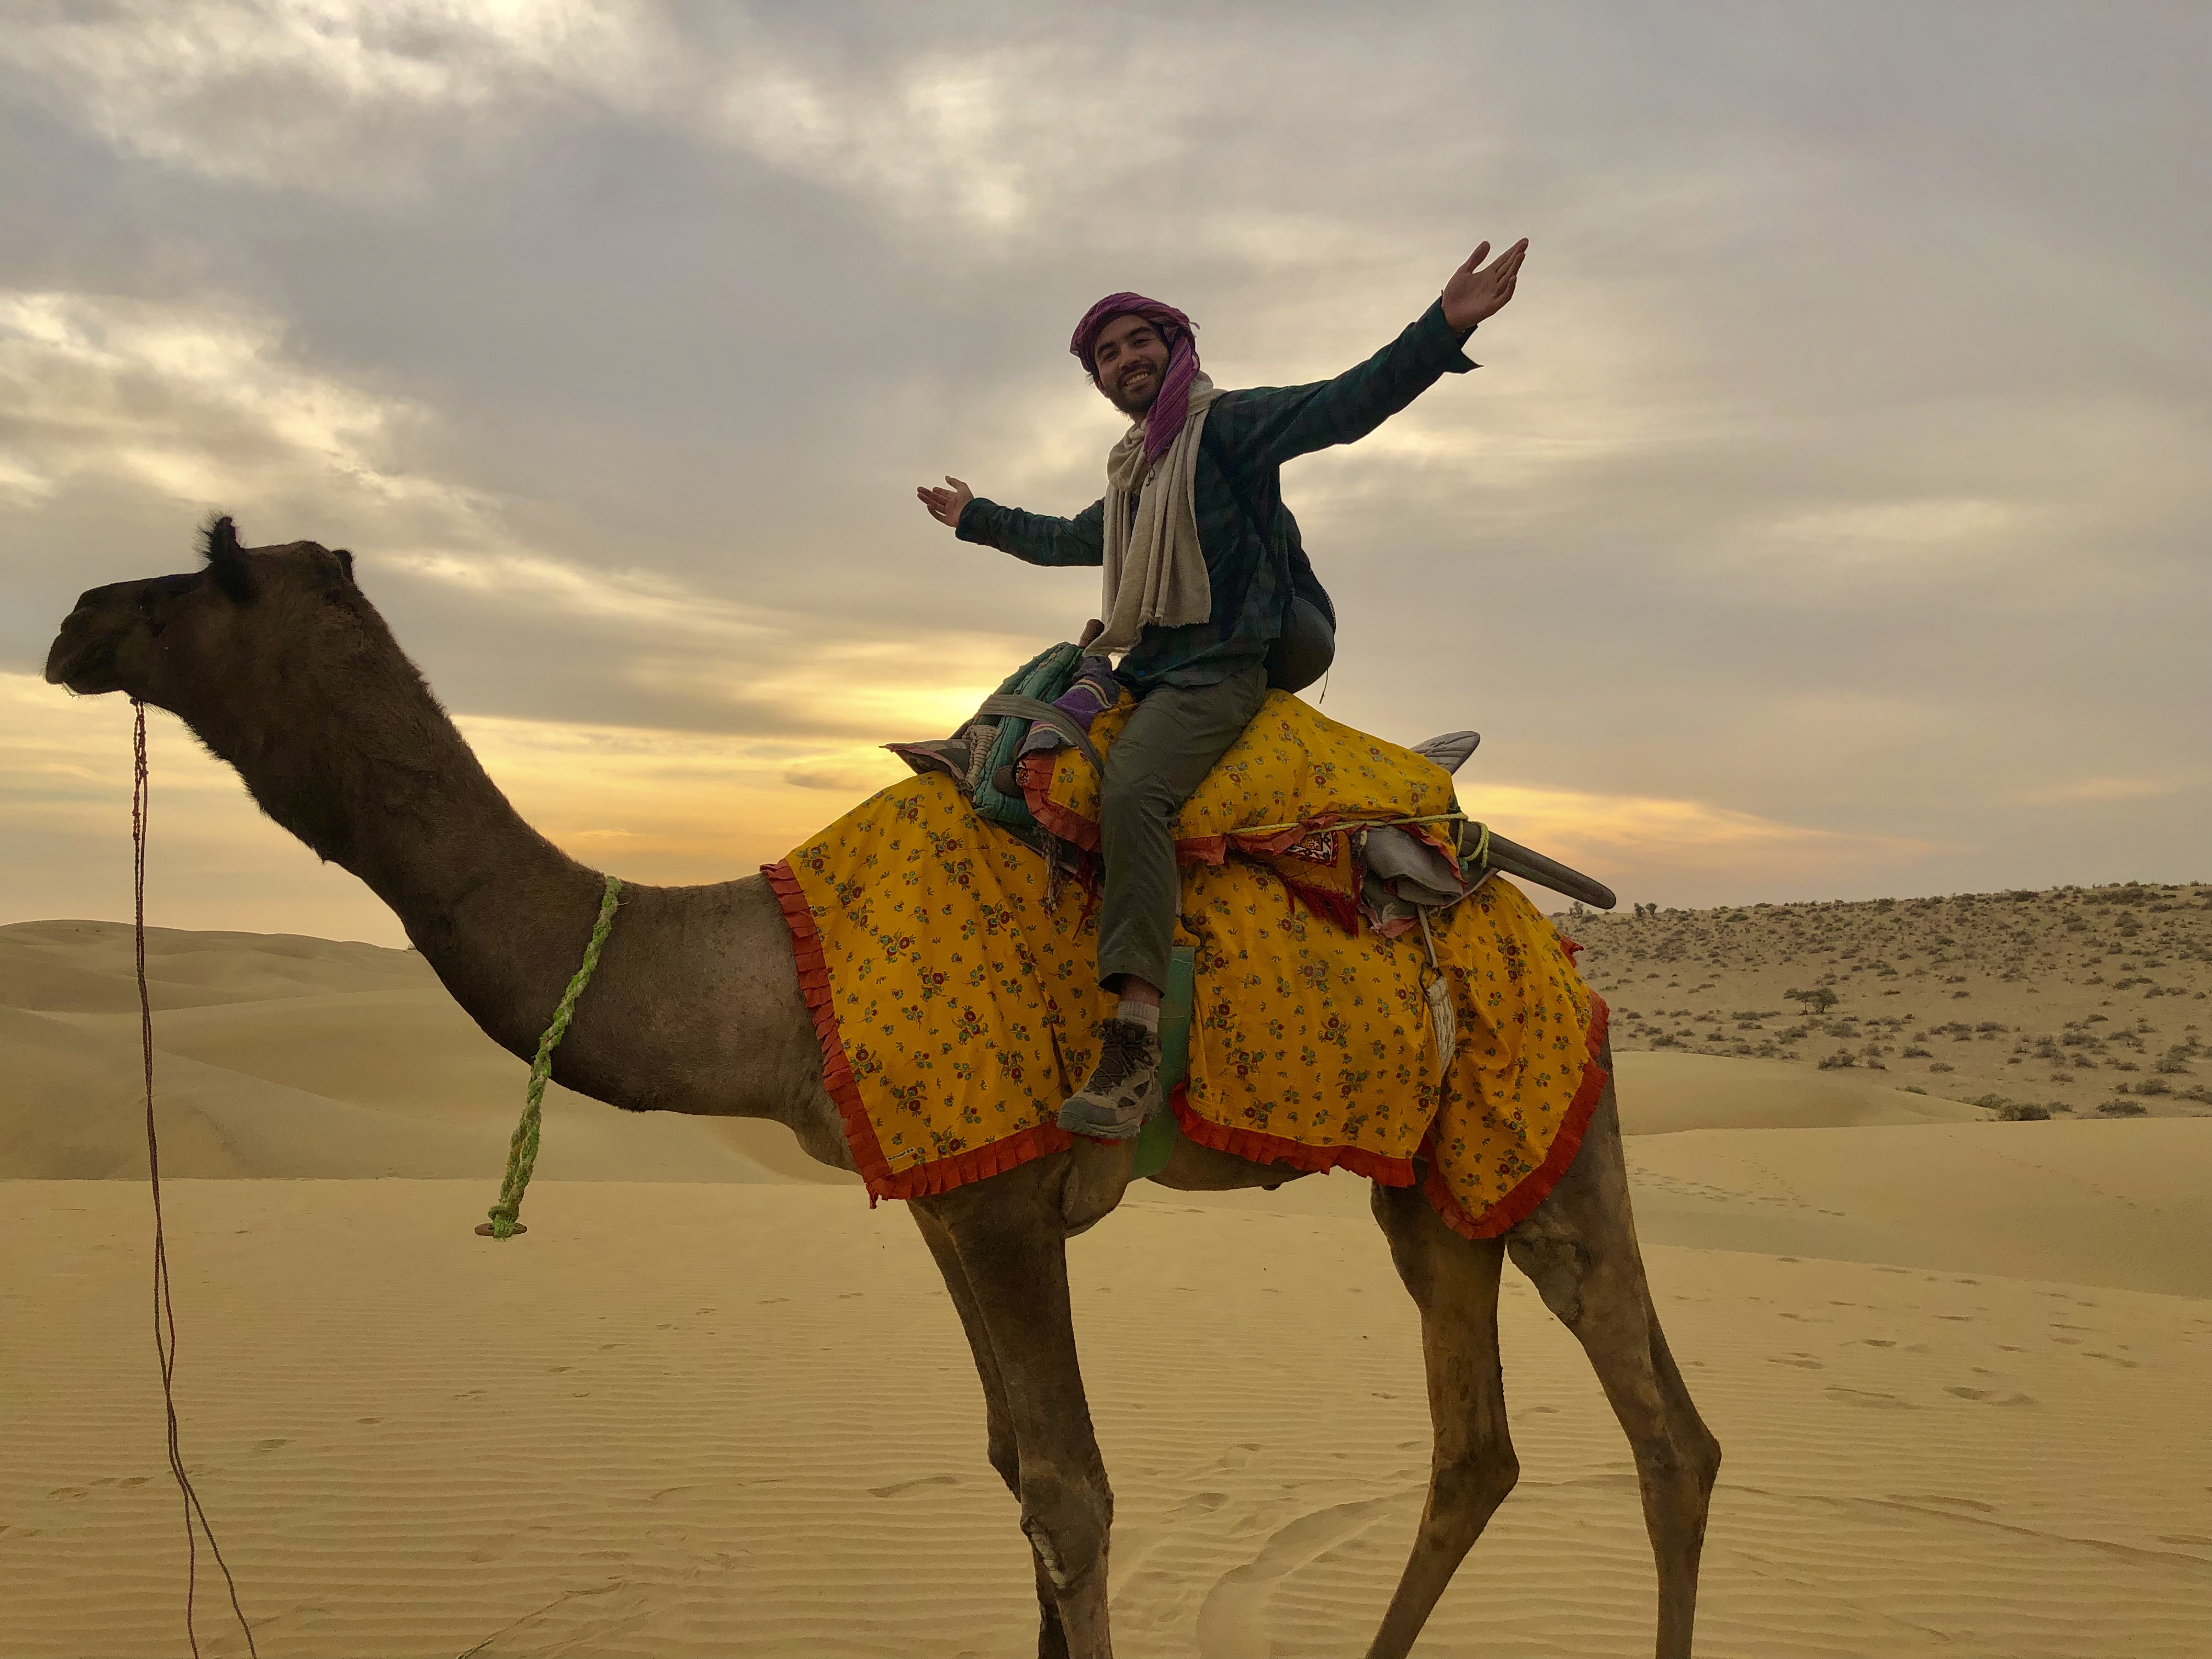 Camel Culture: My Experience Going on a Camel Safari in India’s Thar Desert